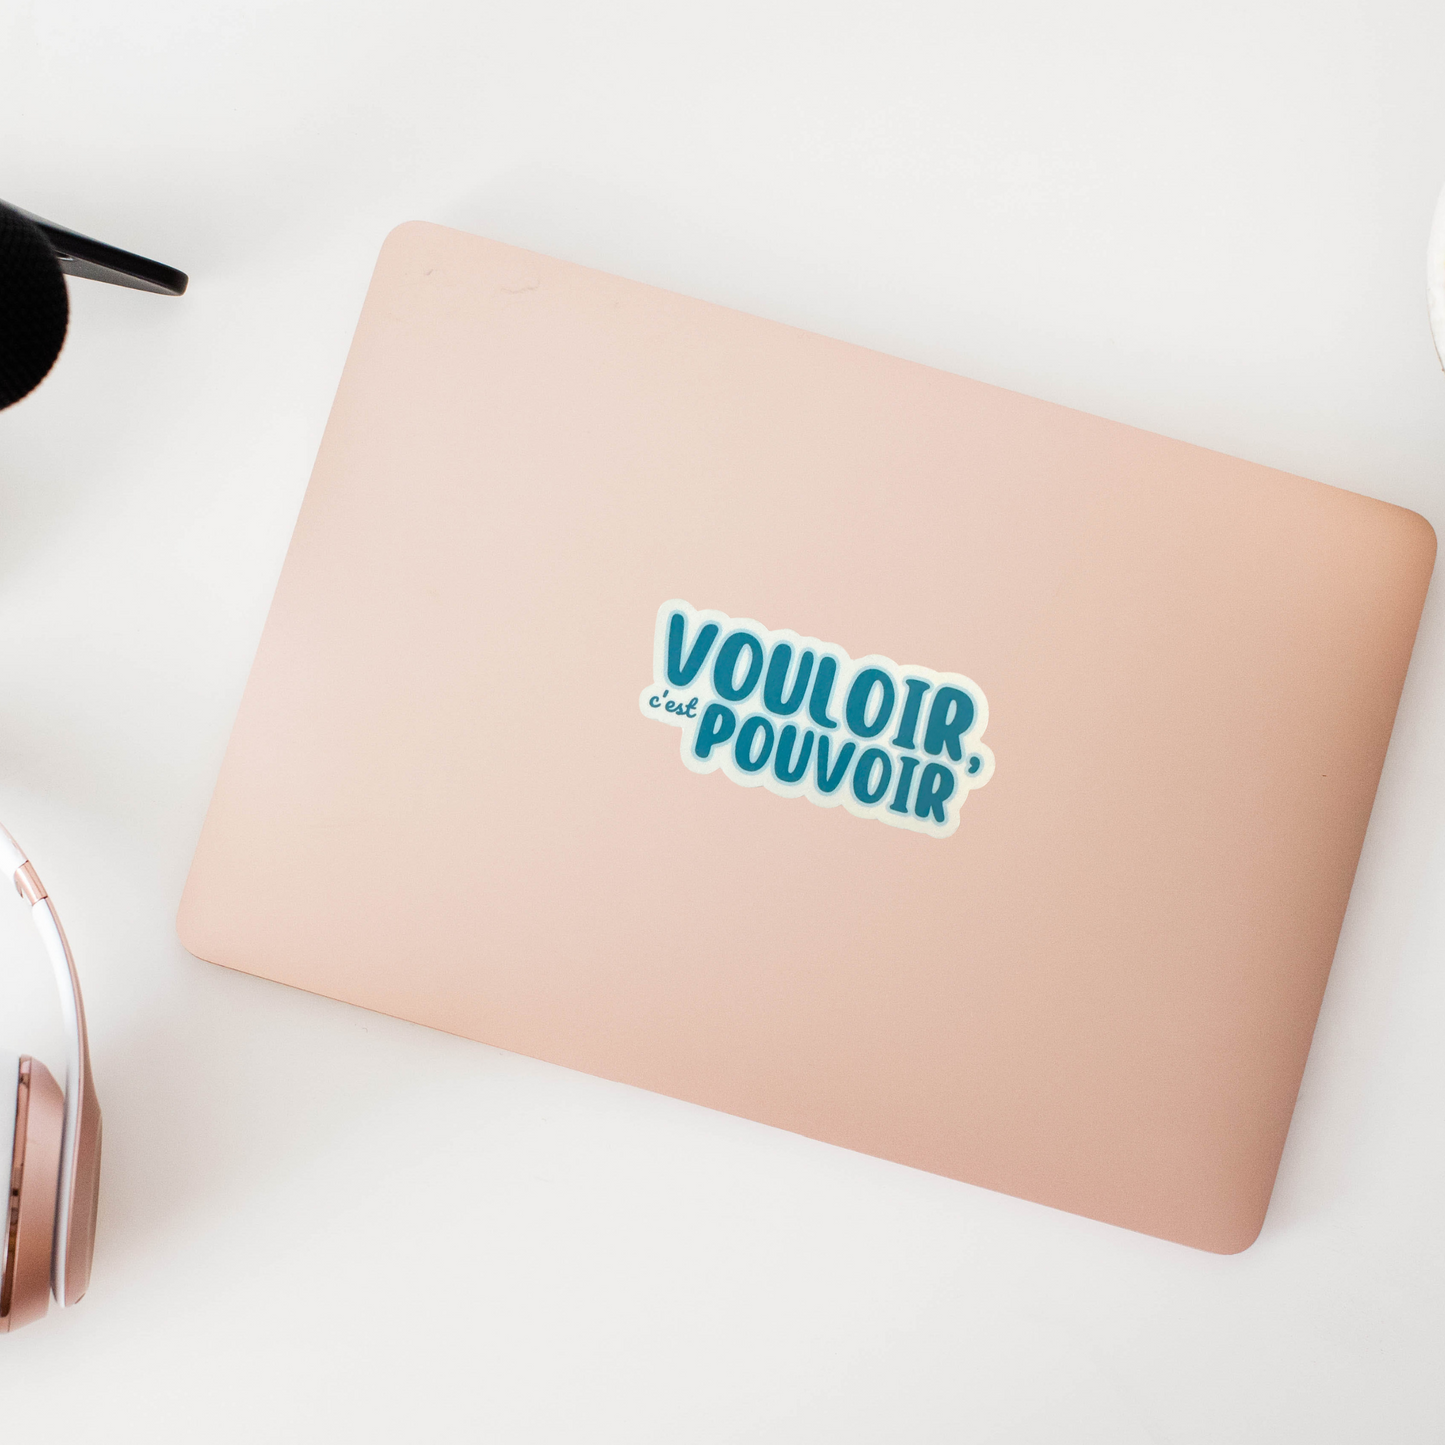 Vouloir C'est Pouvoir Sticker - To Want Is To Be Able To